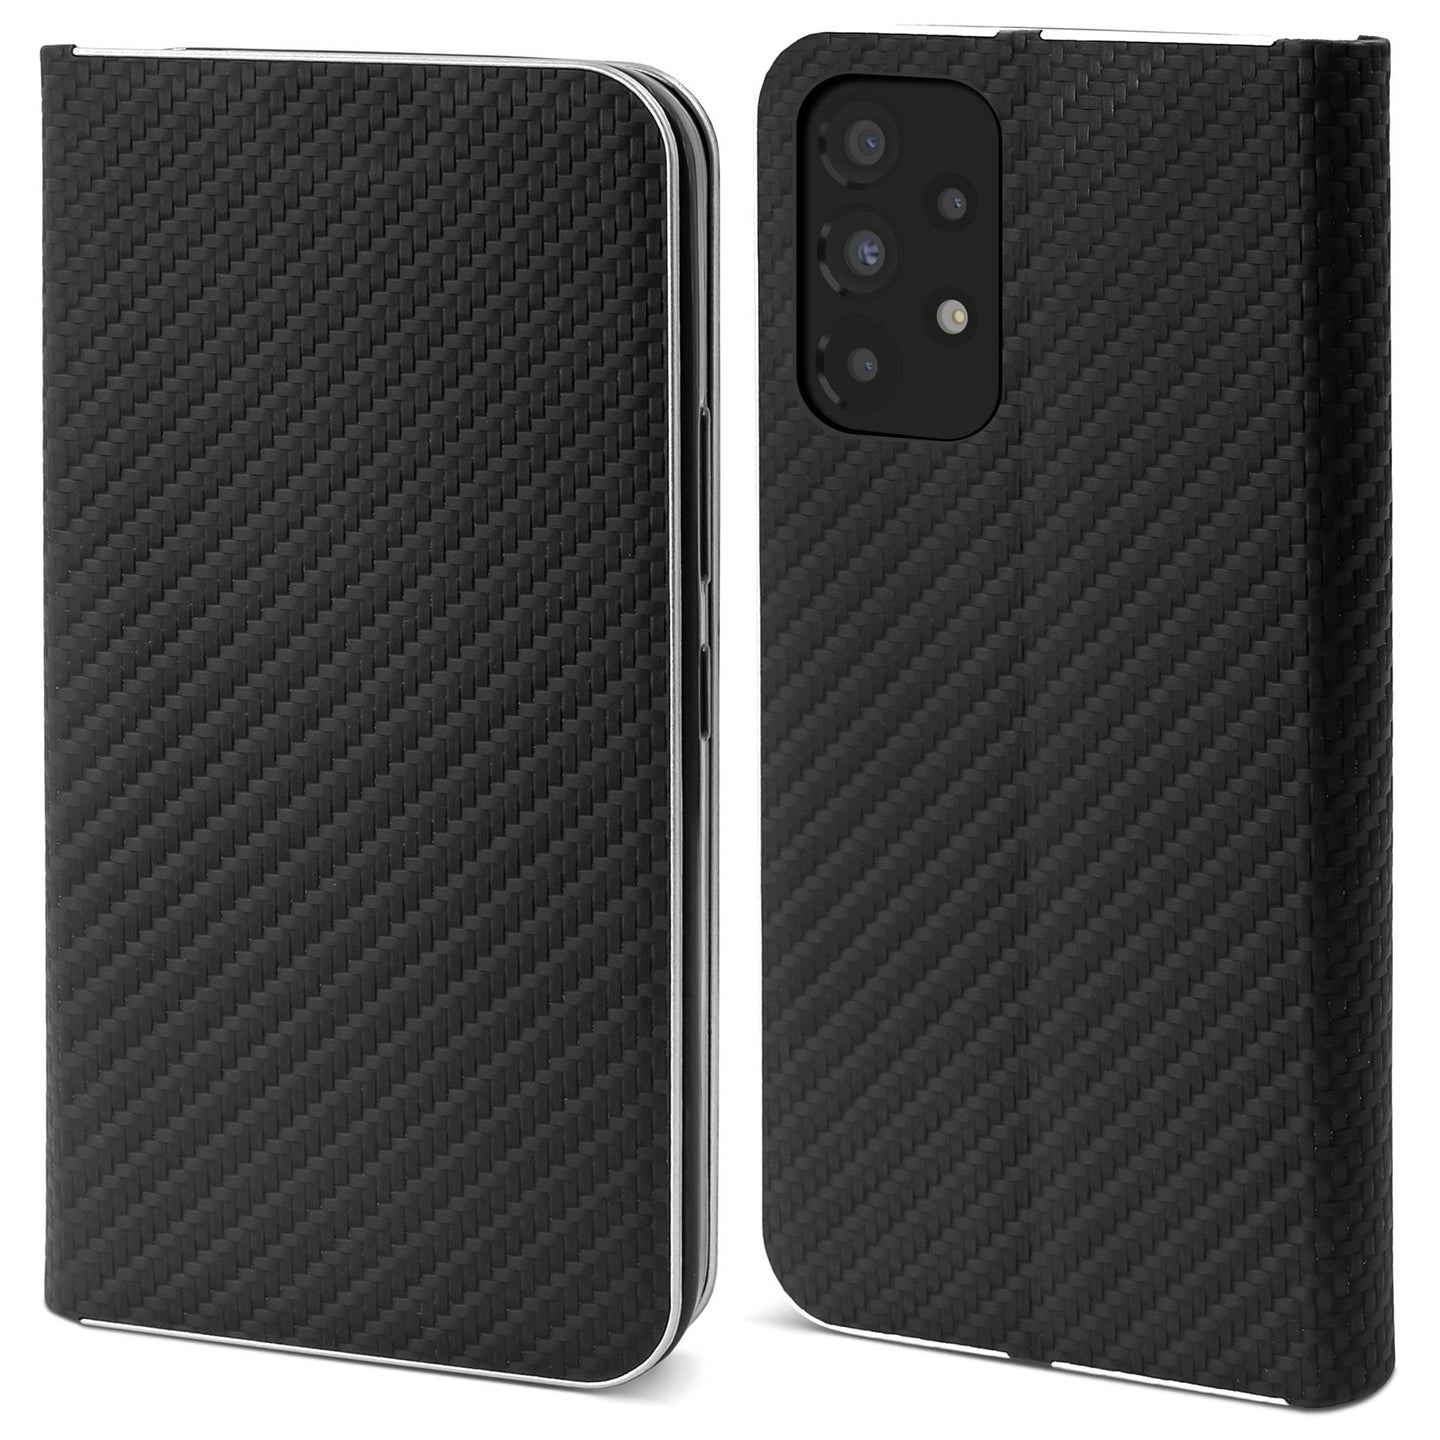 Moozy Wallet Case for Samsung A33 5G, Black Carbon – Flip Case with Metallic Border Design Magnetic Closure Flip Cover with Card Holder and Kickstand Function